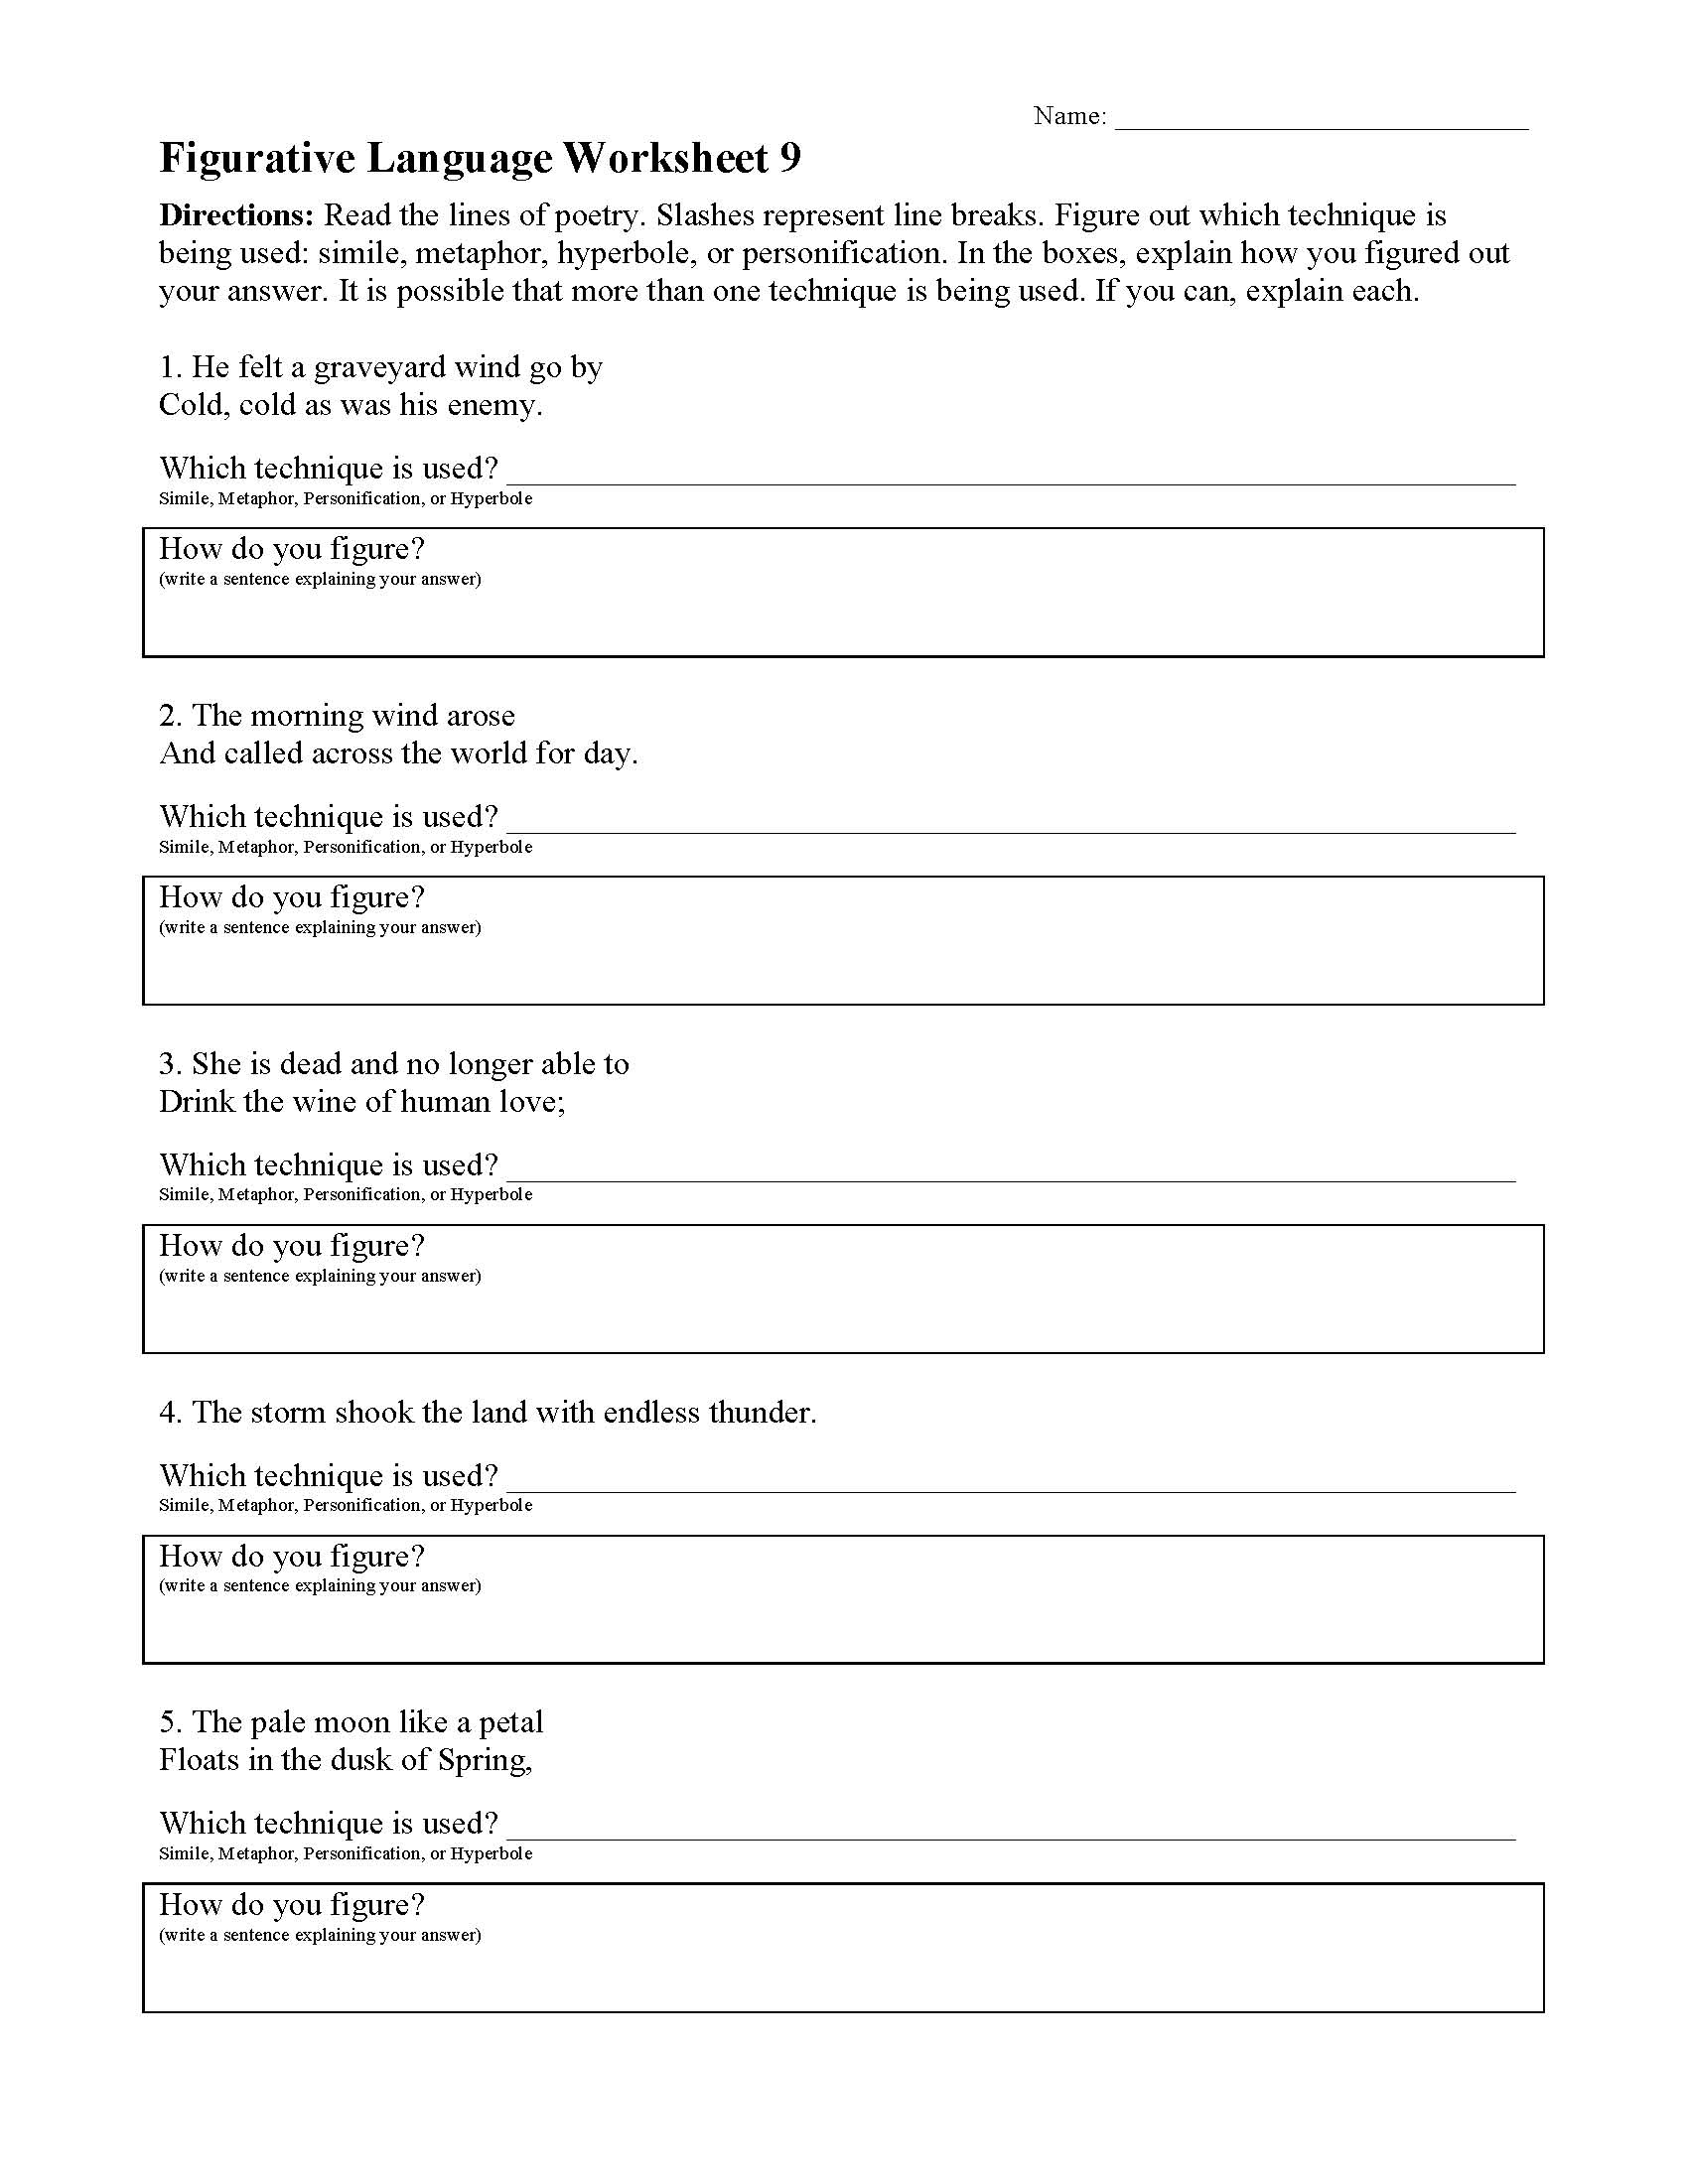 This is a preview image of Figurative Language Worksheet 9. Click on it to enlarge it or view the source file.